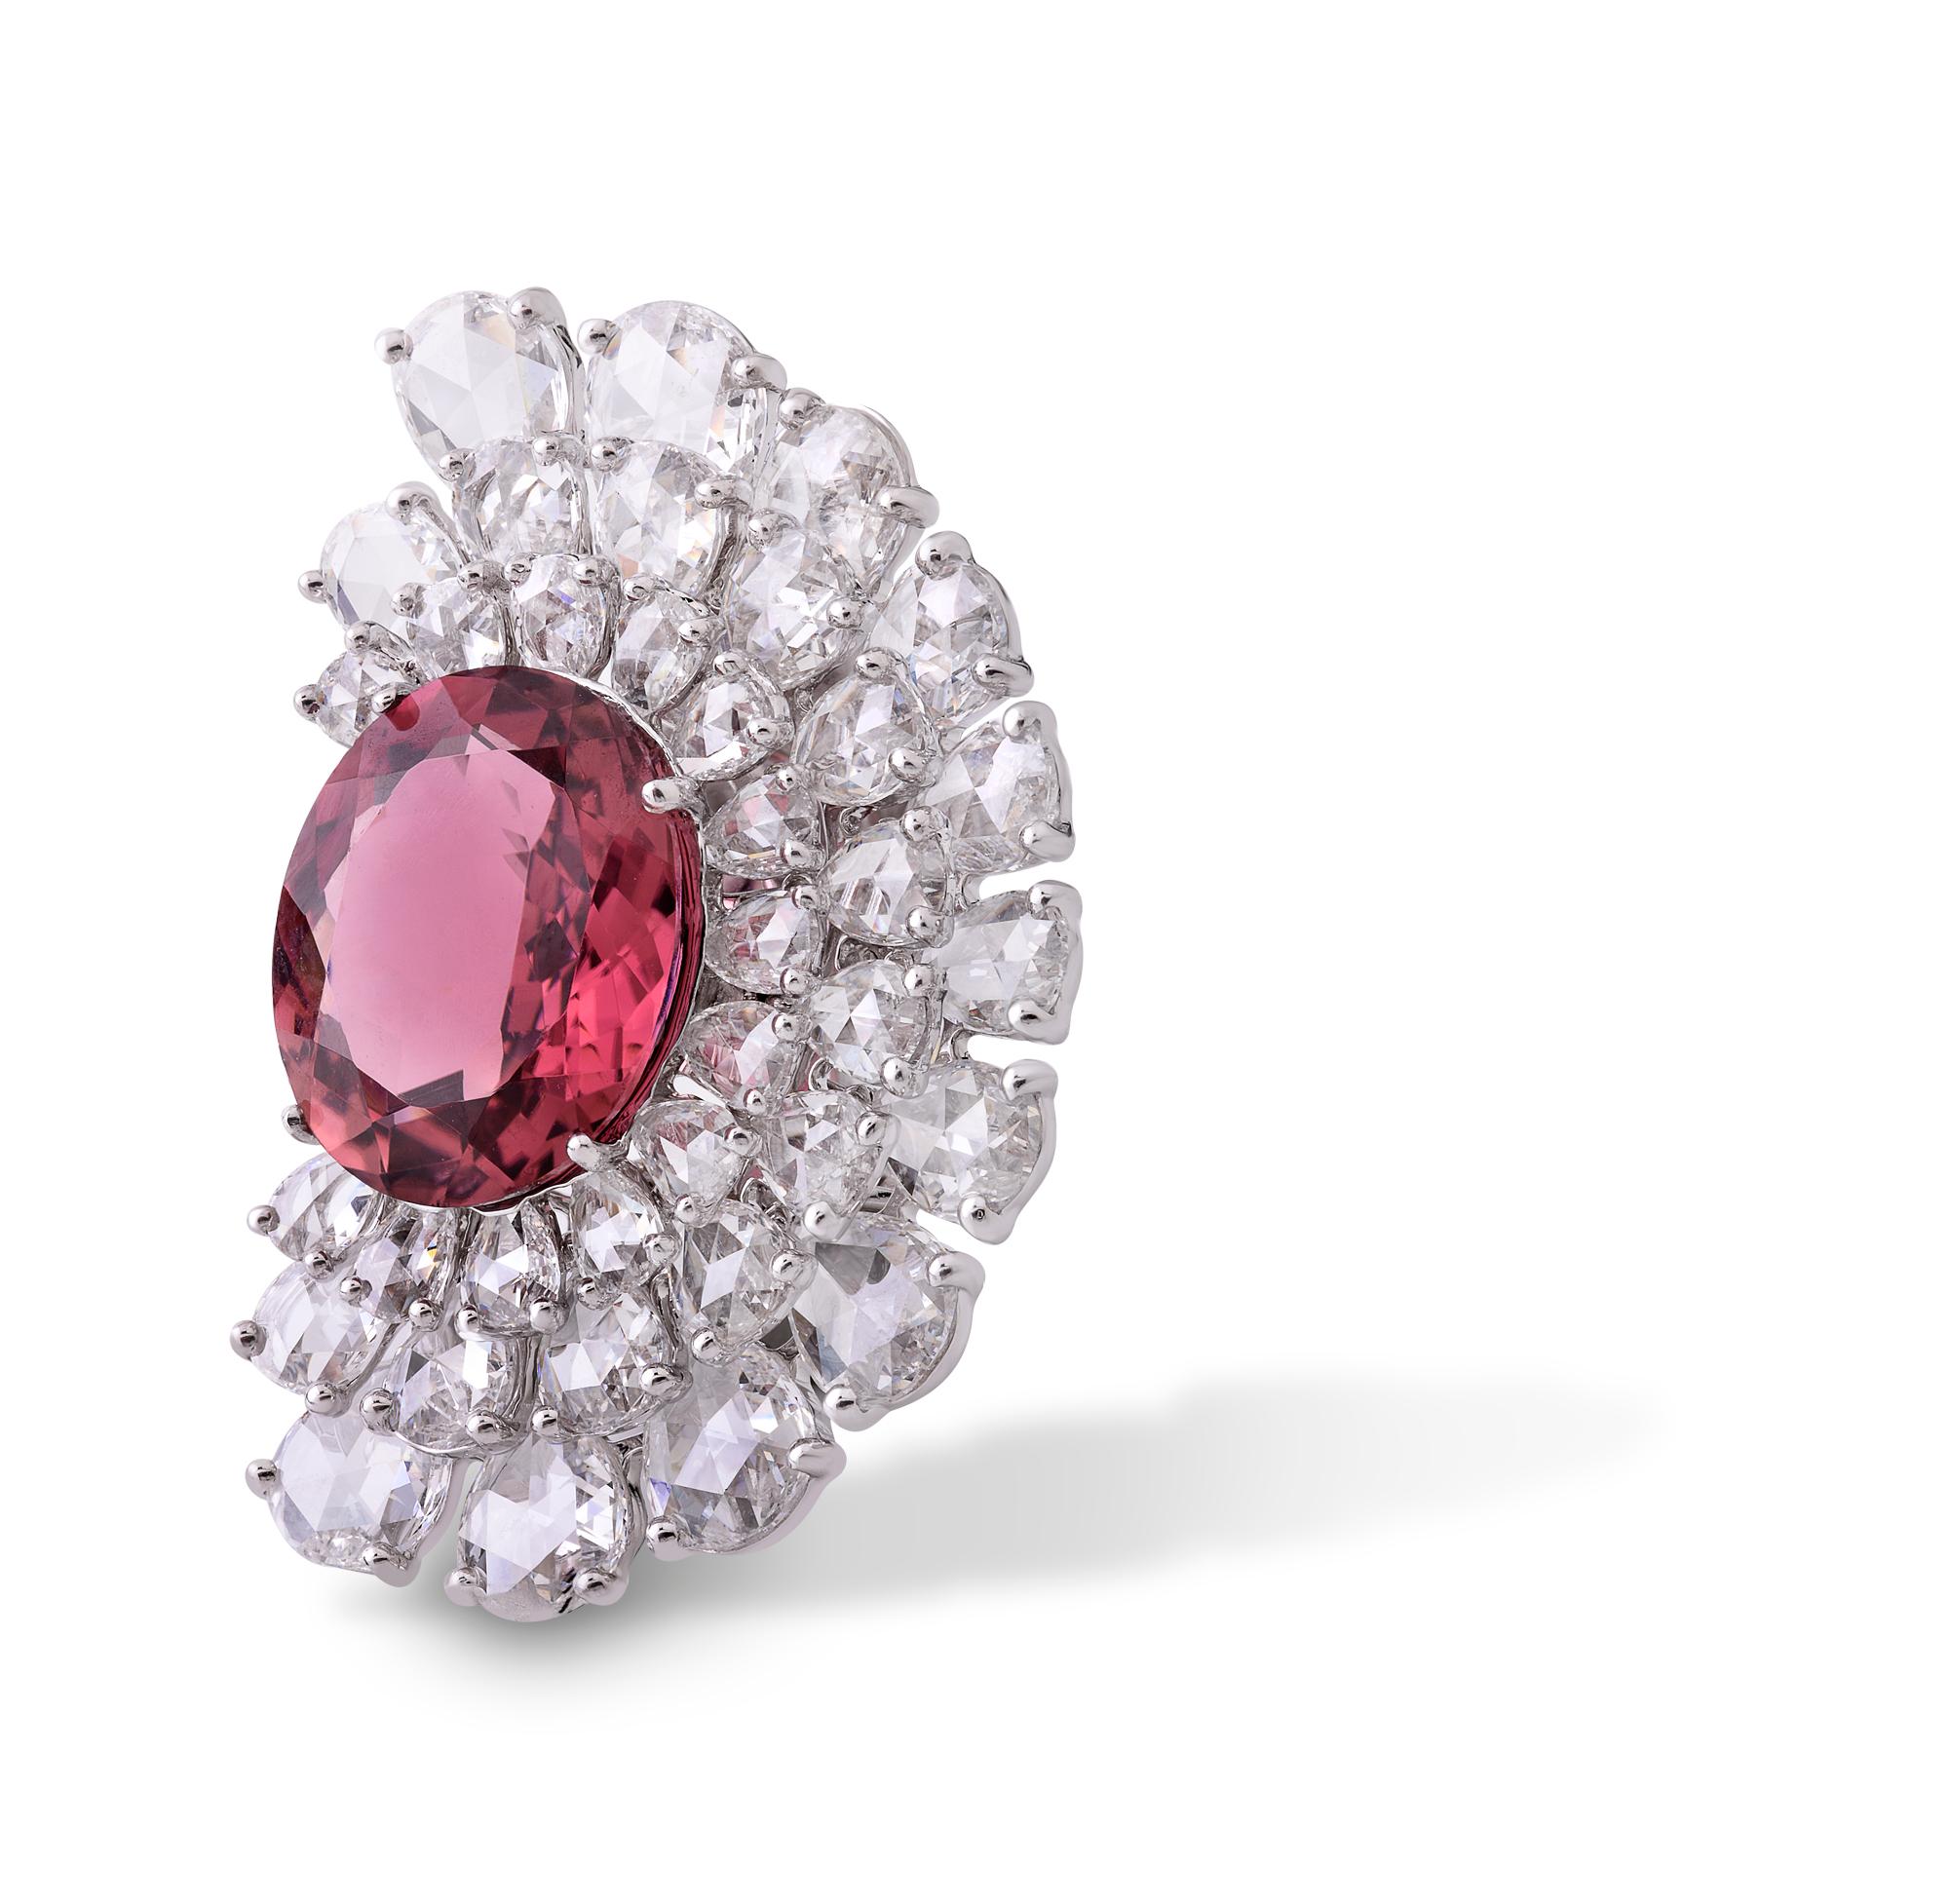 These bold, 11.68cts fan-shaped earrings, set with 5.78cts of fancy shape rose cut diamonds surrounding a pair of striking hand-cut 5.90cts of rubellite stones, evoke an aura of mystery. 

Rubellite: 5.90 carats 
White pear shape rose-cut diamonds: